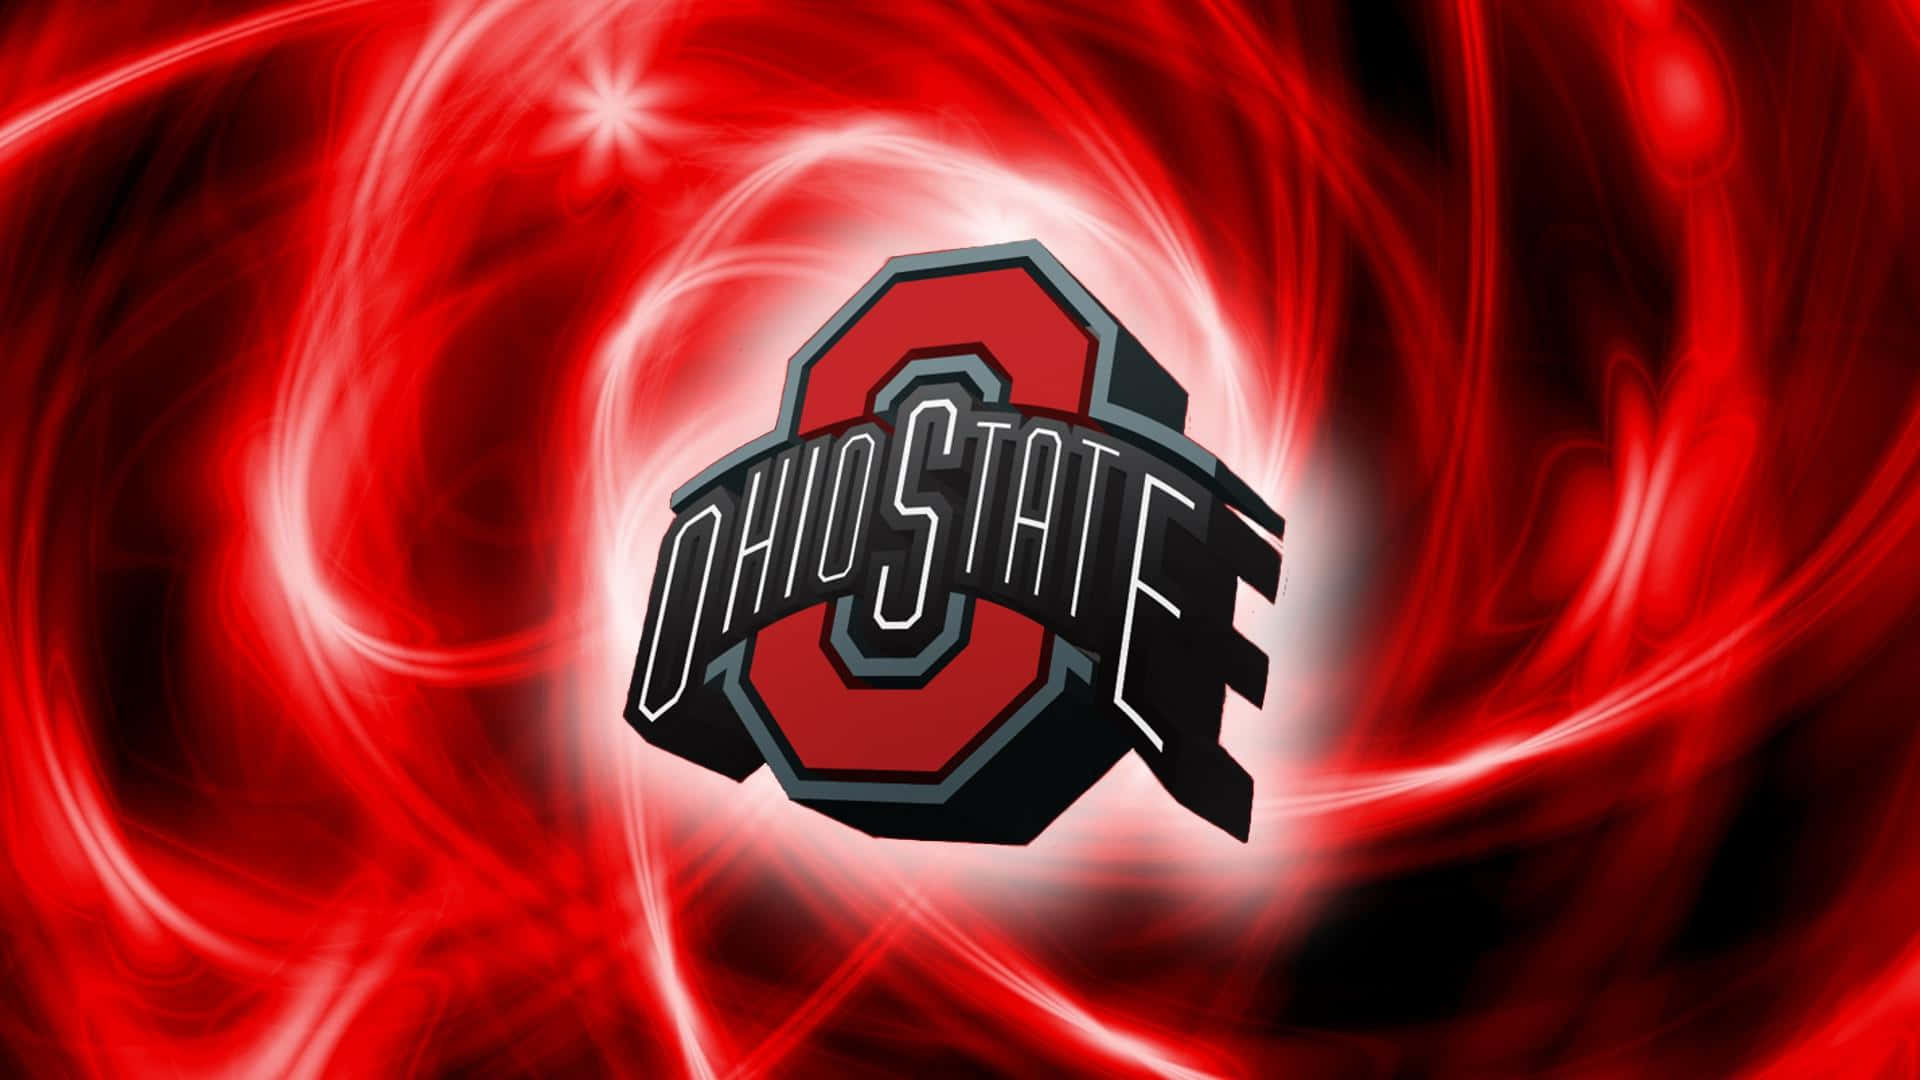 Look cool with stylin' Ohio State pride! Wallpaper